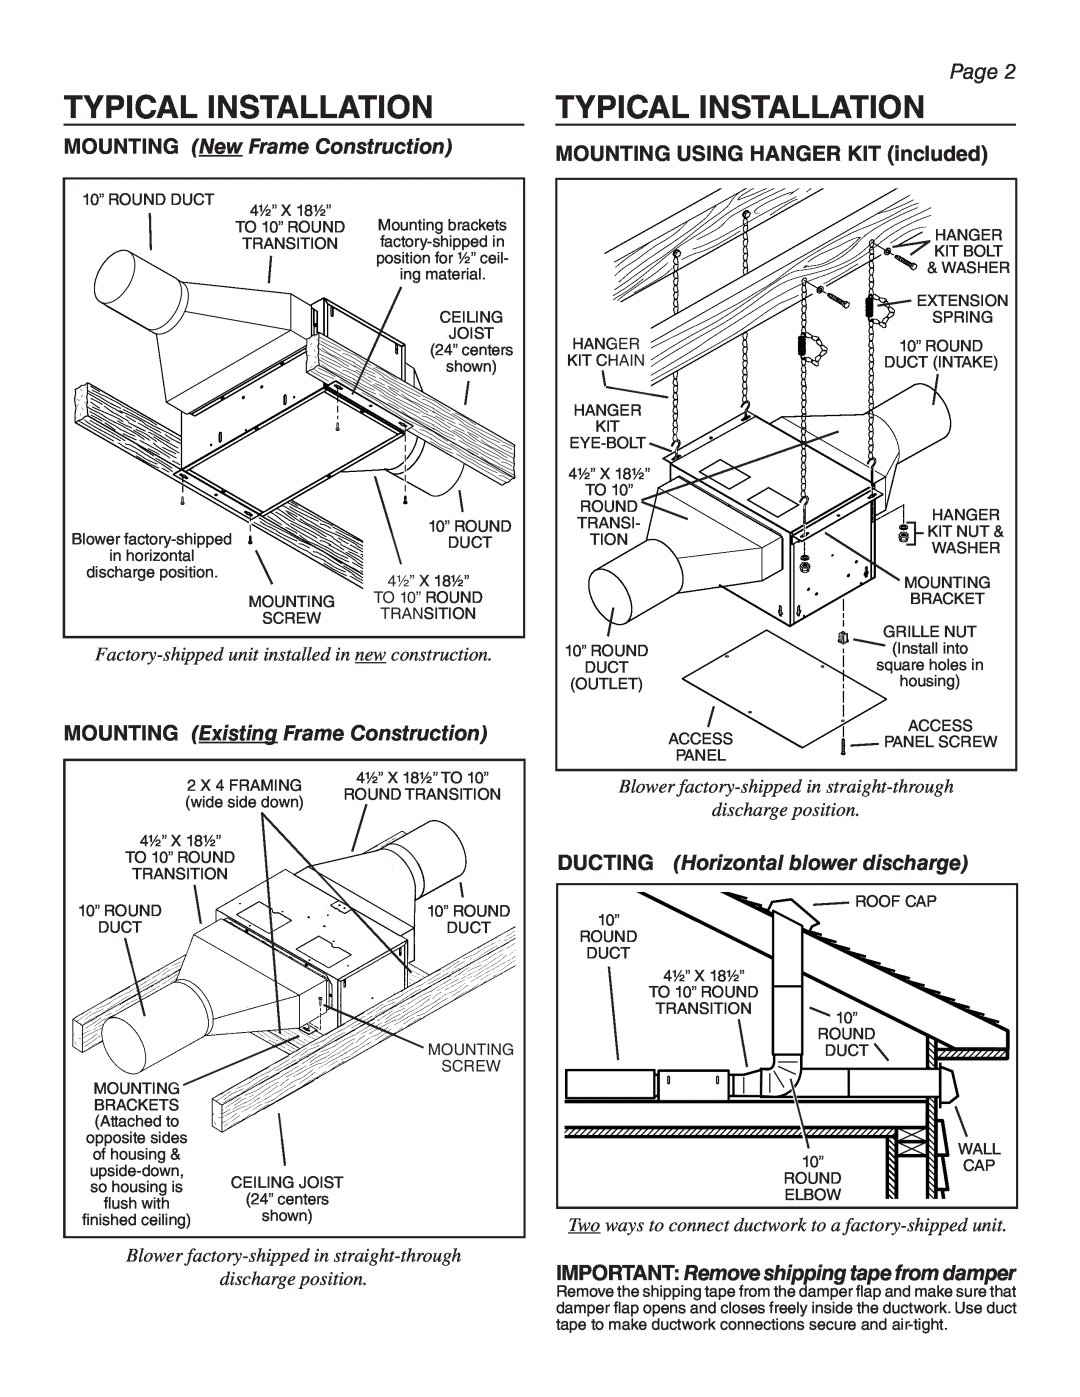 Sub-Zero CTWH30, CTWH36 Typical Installation, MOUNTING NewFrame Construction, MOUNTING ExistingFrame Construction, Page 